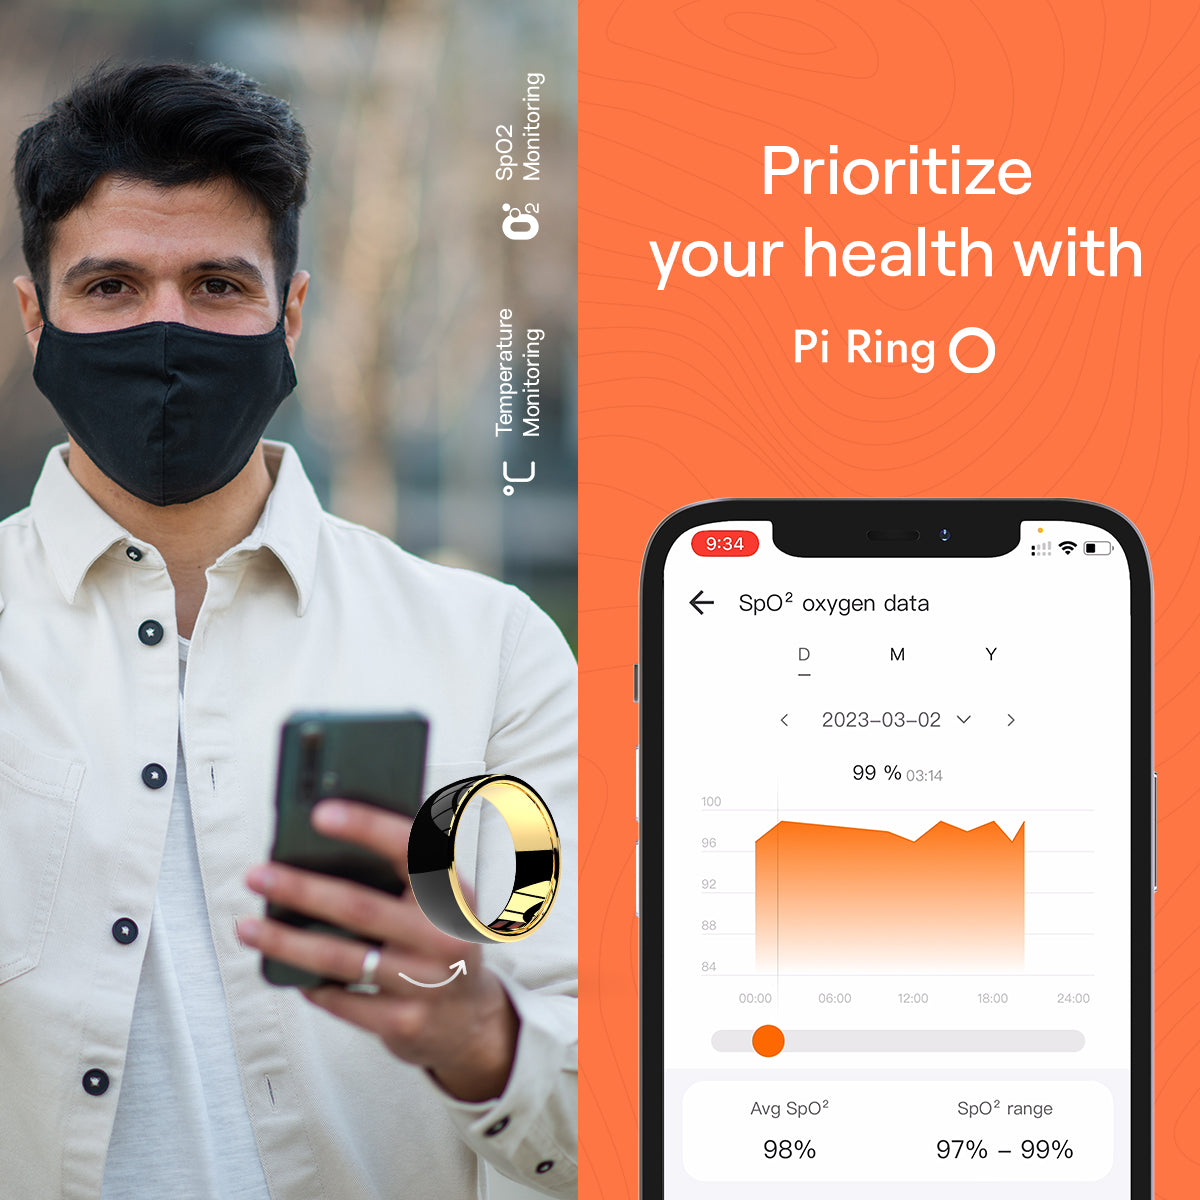 Pi Ring - India’s First Smart Ring for Fitness, Stress, Sleep & Health.